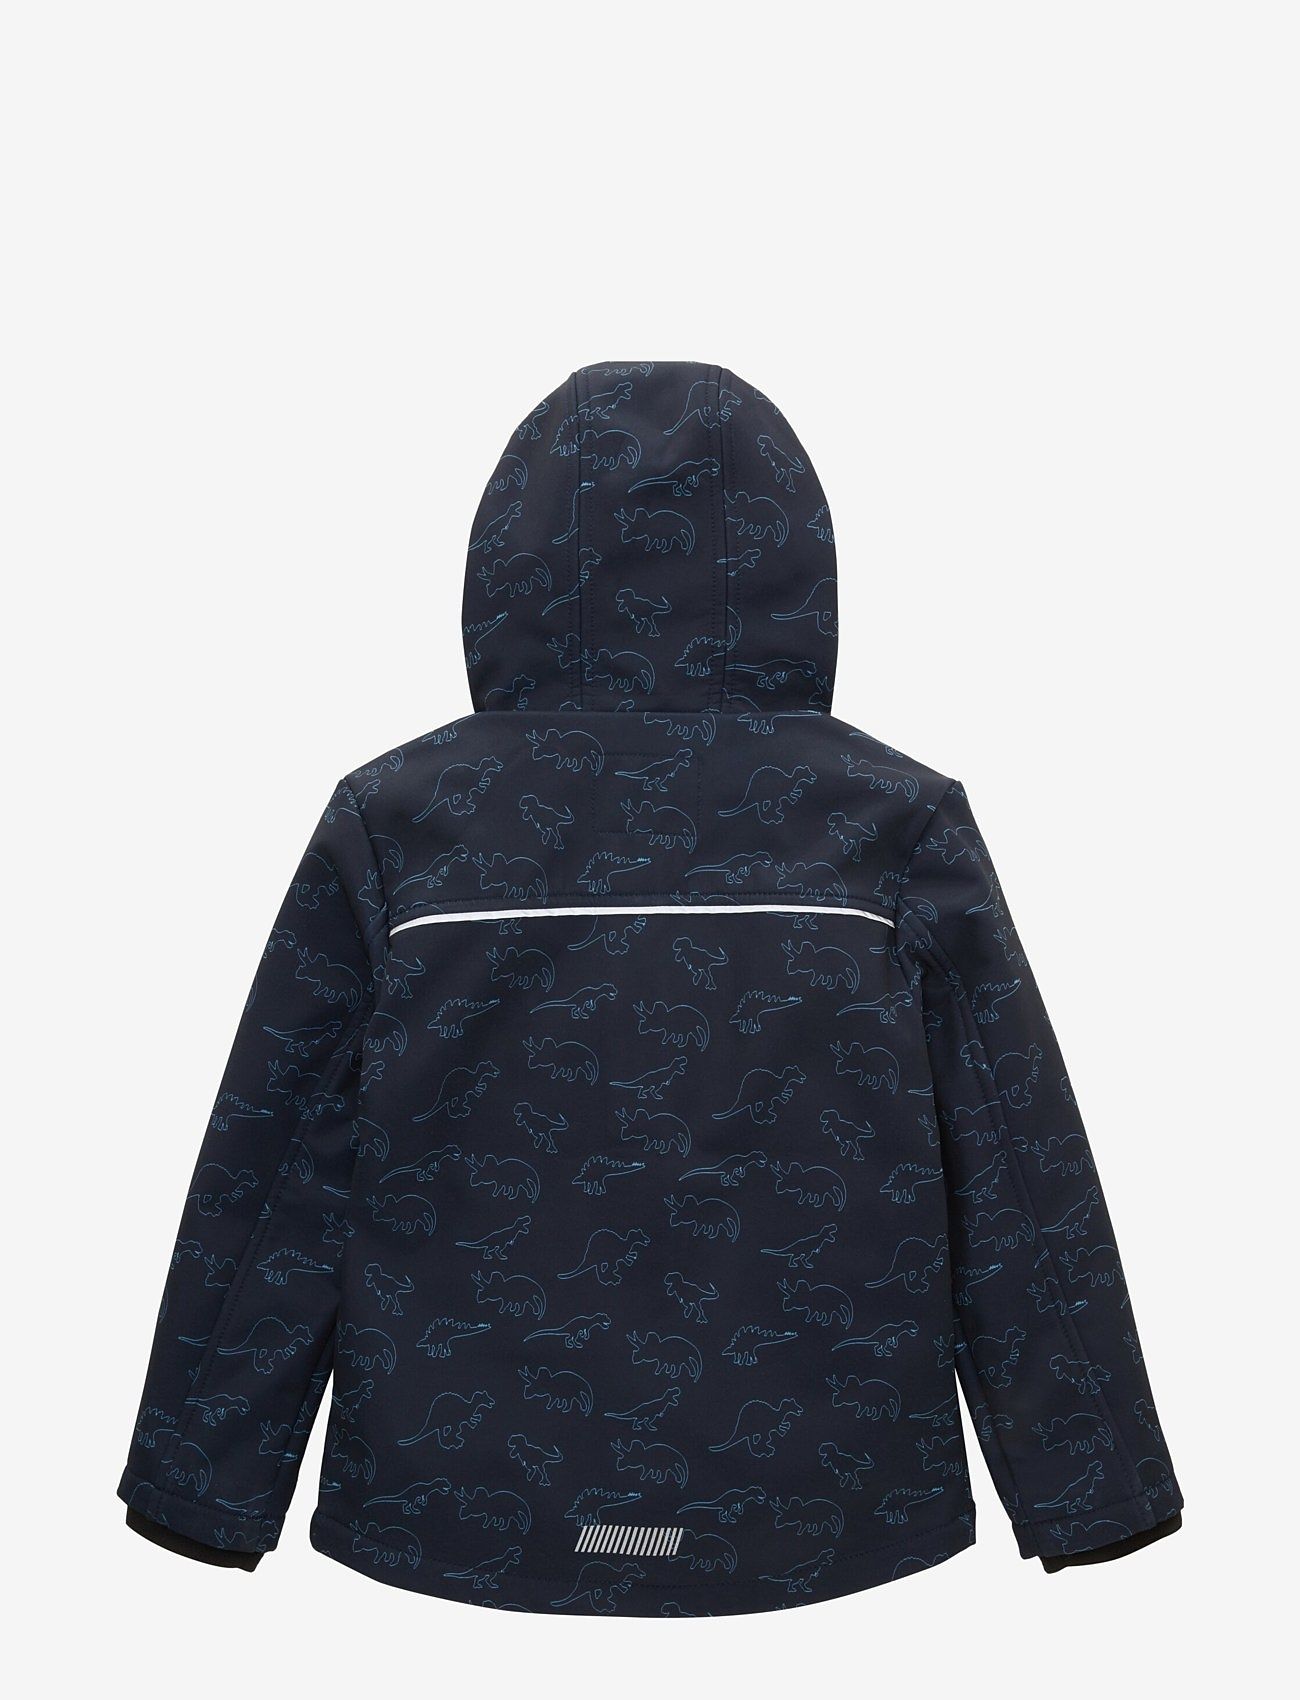 Tom Tailor - softshell jacket - dzieci - navy blue outlined dino aop - 1